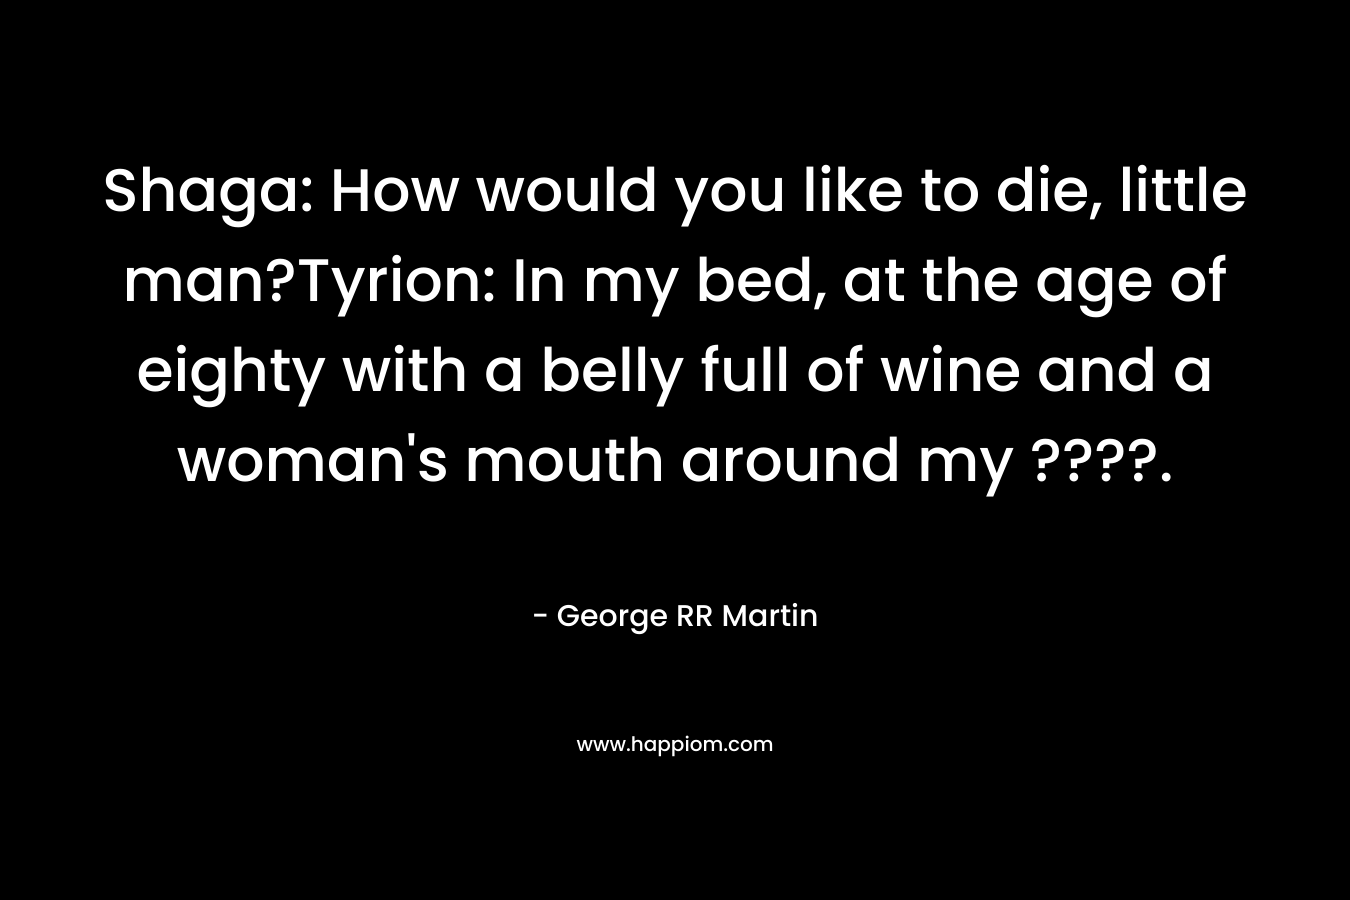 Shaga: How would you like to die, little man?Tyrion: In my bed, at the age of eighty with a belly full of wine and a woman’s mouth around my ????. – George RR Martin